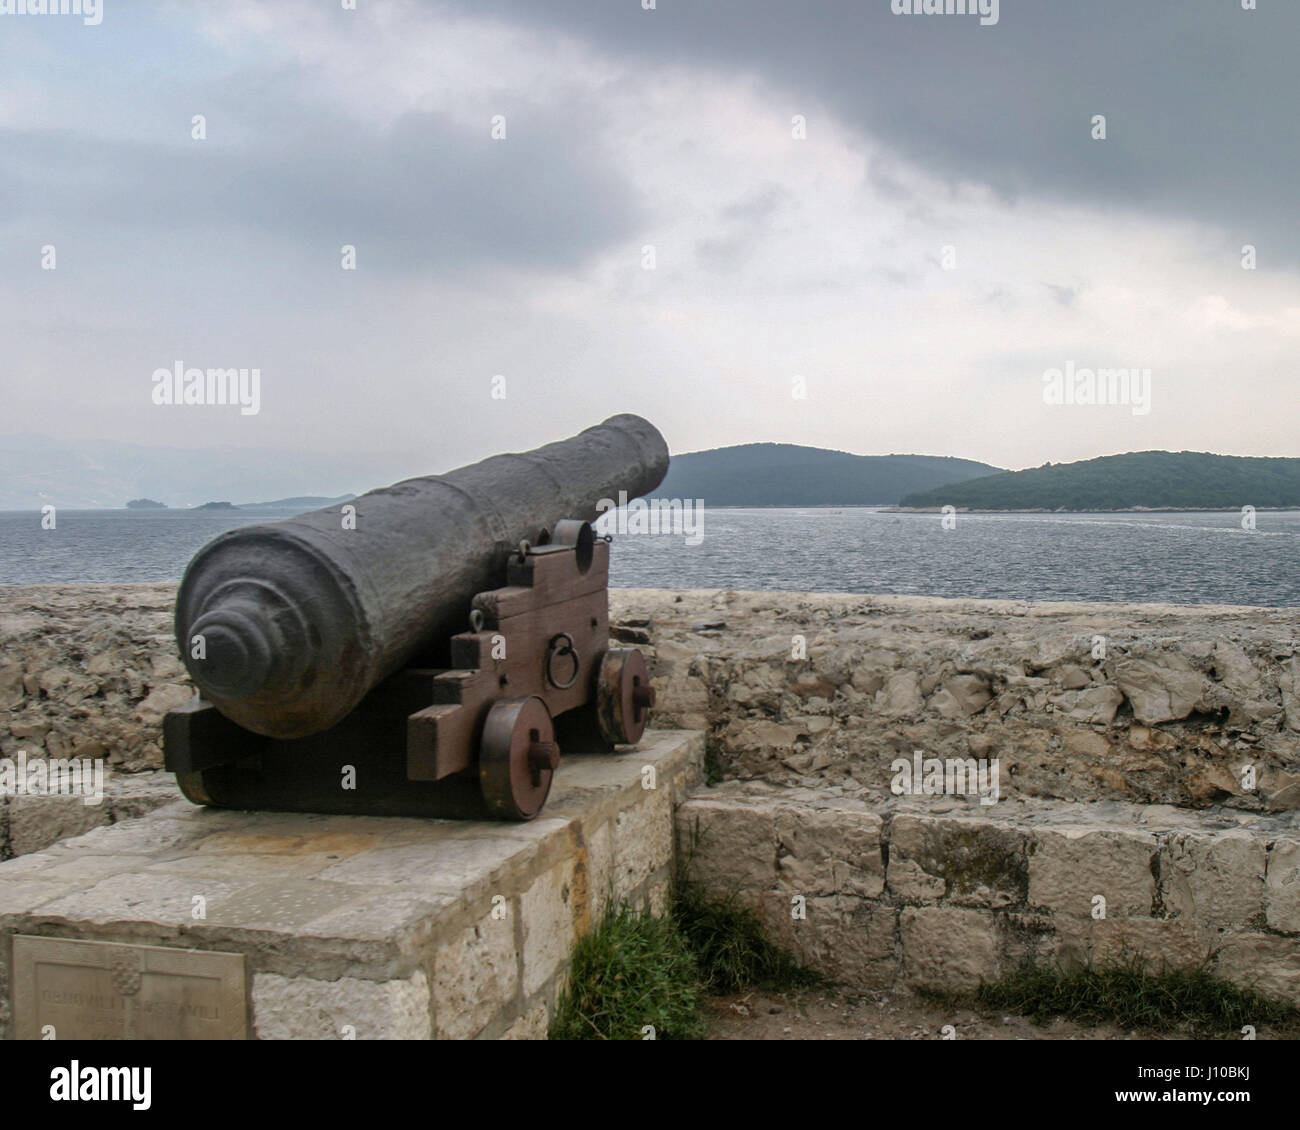 Korcula, Croatia. 9th Oct, 2004. An ancient cannon in the medieval fortified Old Town of Korcula, Croatia, look out on the Peljeski Kanal, where several historic battles occurred, toward the mainland. Korcula has become an international tourist destination. Credit: Arnold Drapkin/ZUMA Wire/Alamy Live News Stock Photo